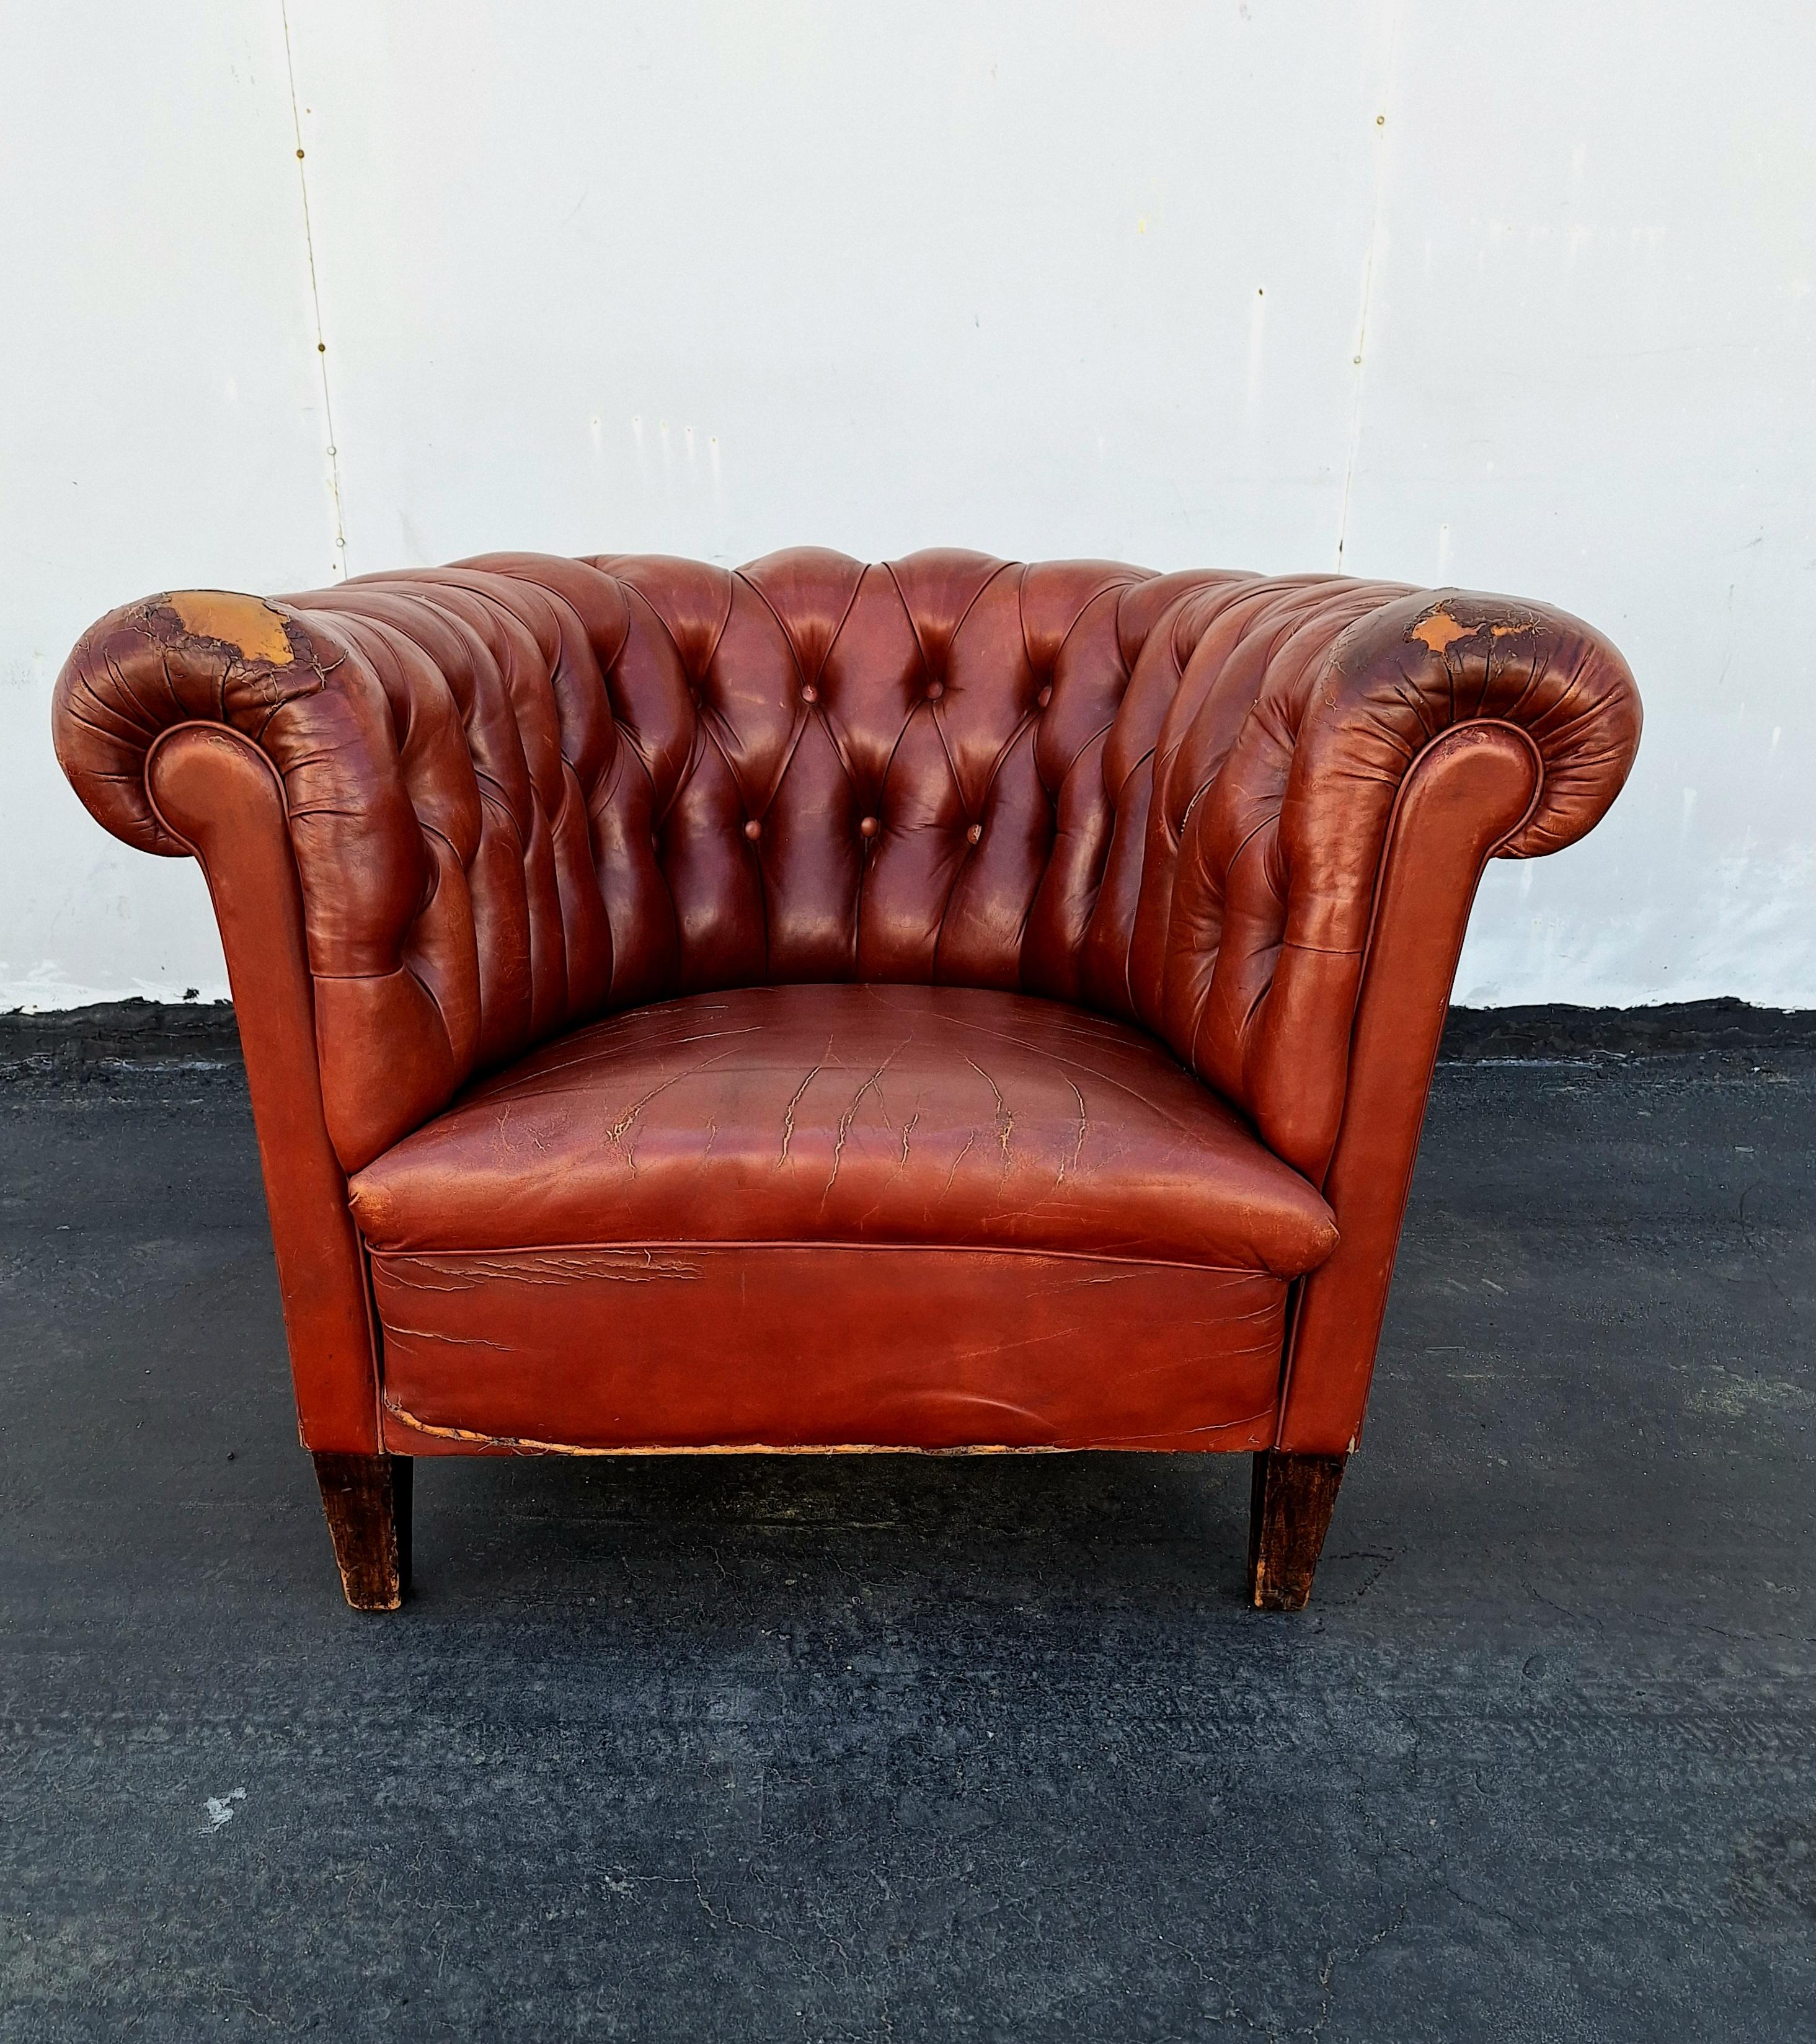 A good quality early 20th century, brown leather club armchair Chesterfield. Original hand dyed  brown leather. This Cesterfield is horse hair filled, with button-back upholstery. standing on the wooden legs with a wonderful patina and very